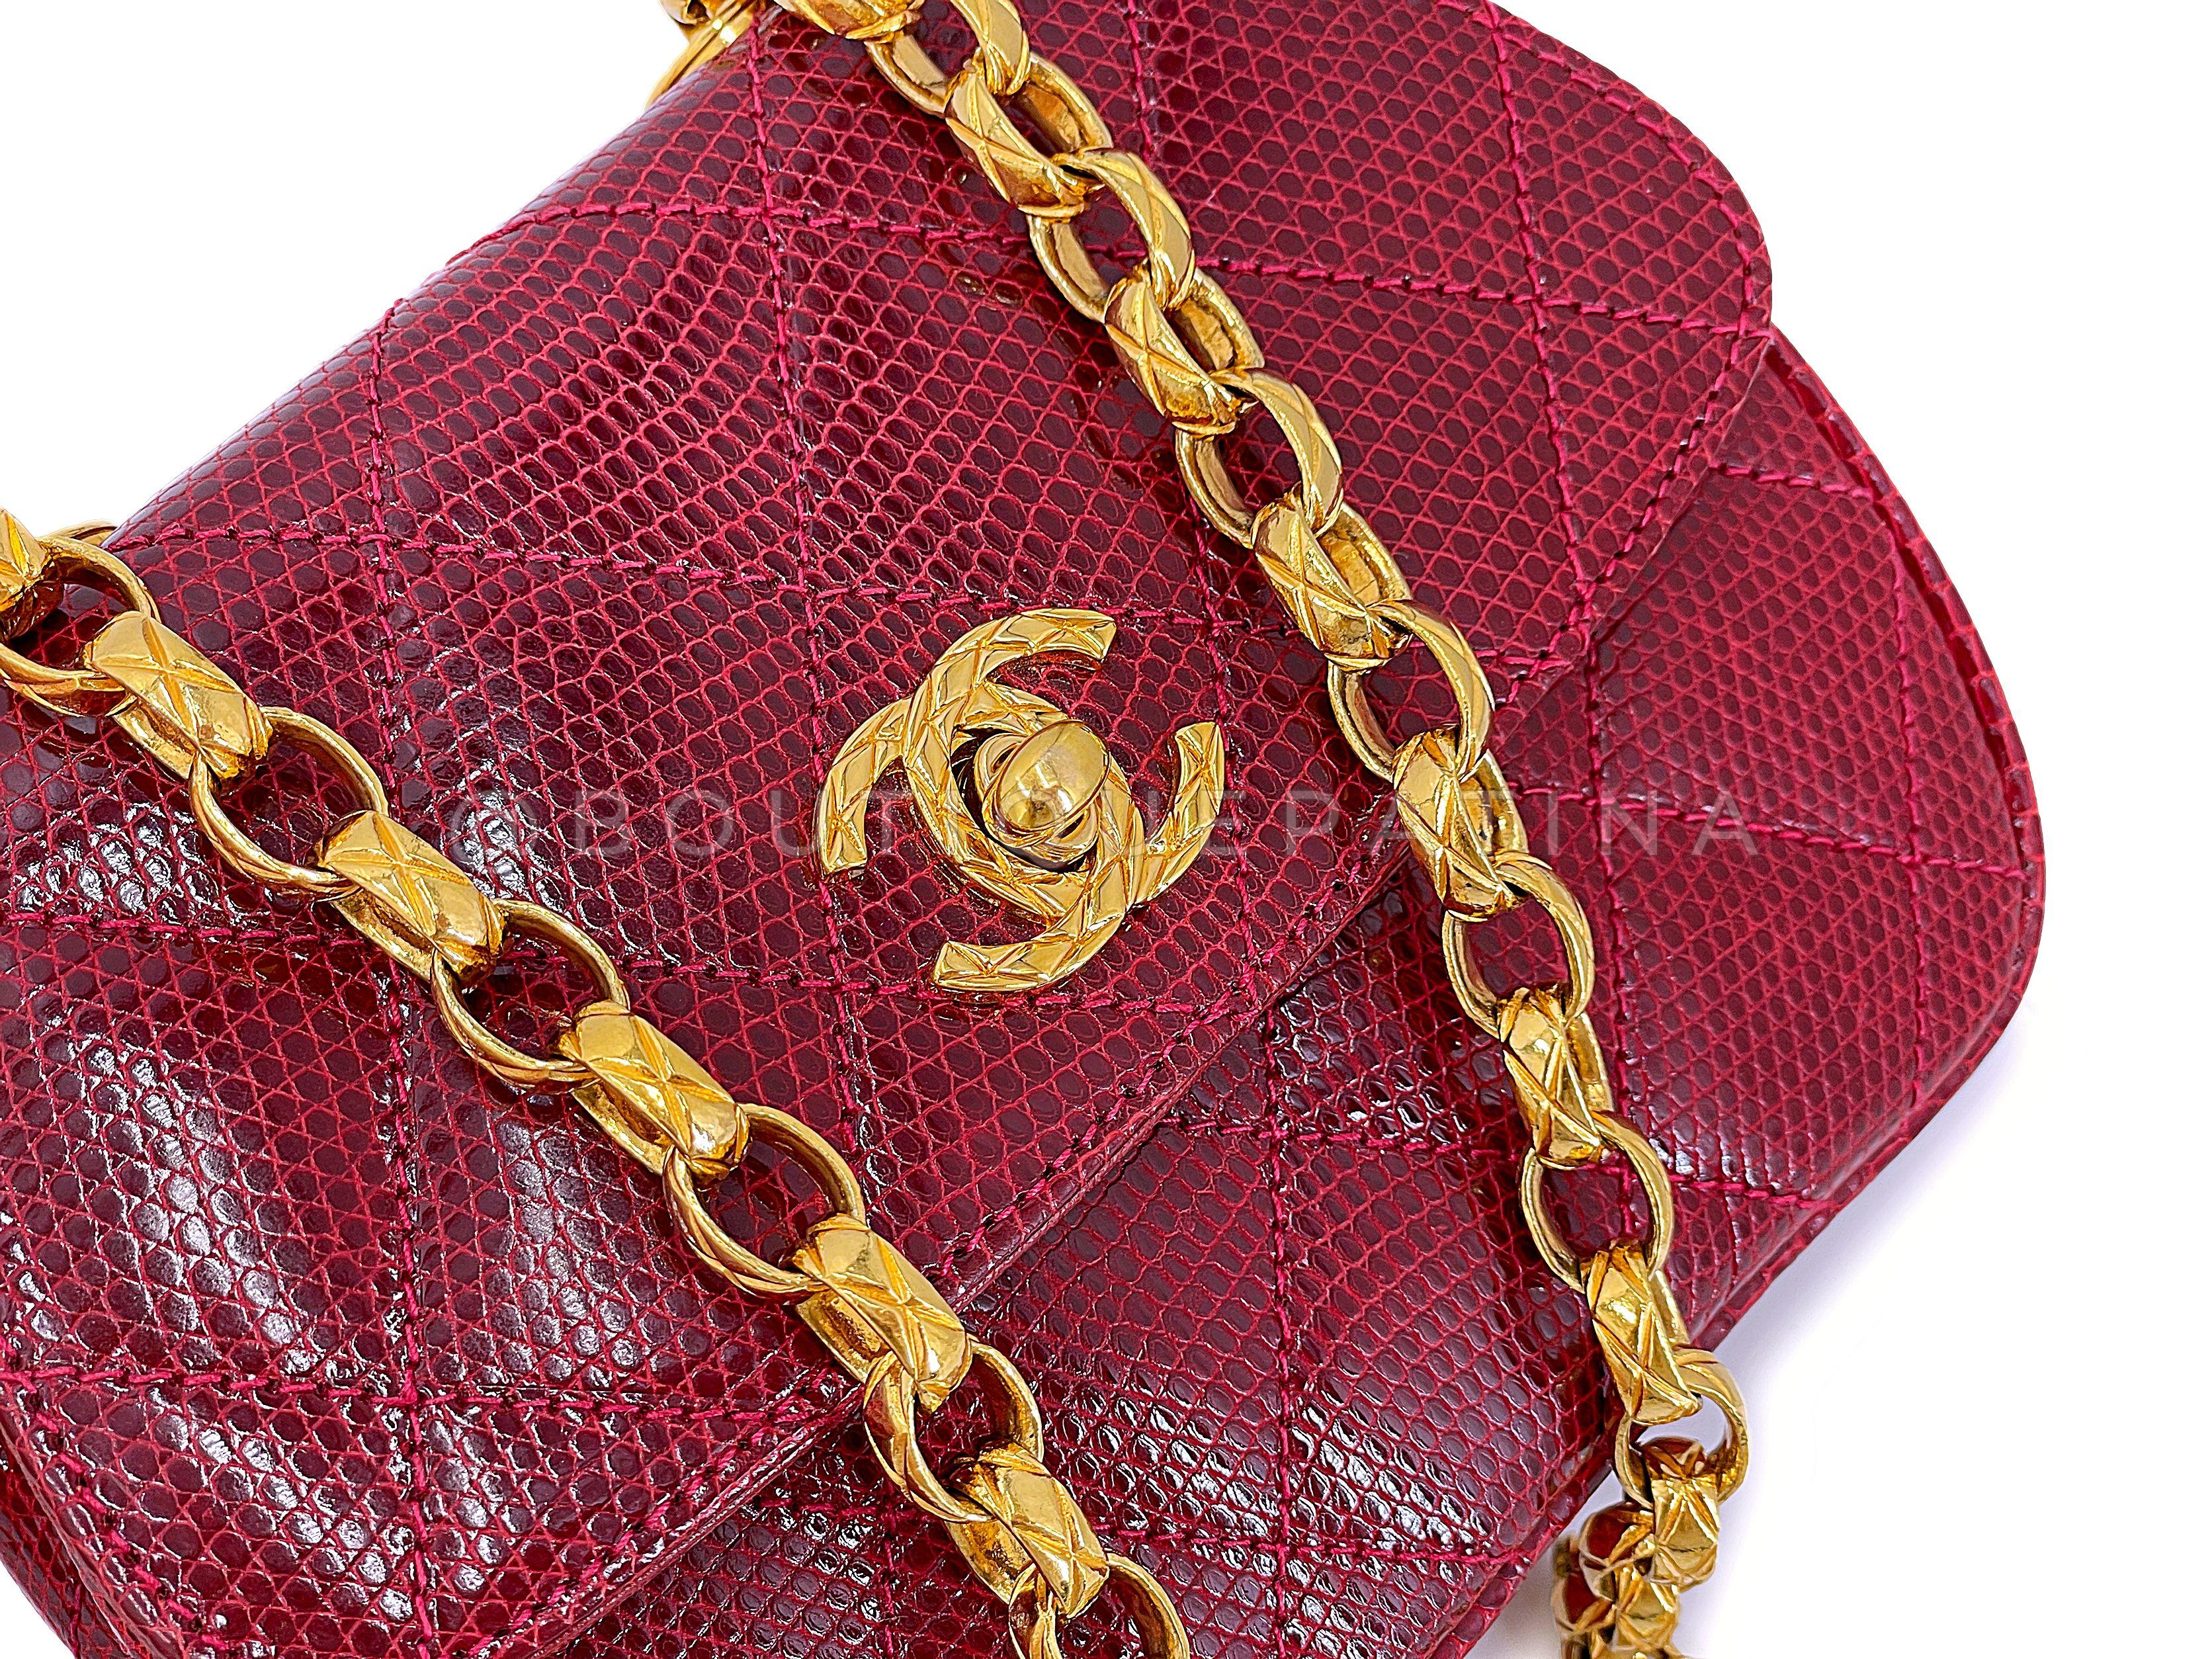 Rare Chanel 1980s Vintage Red Lizard Etched Chain Round Mini Flap Bag 67290 For Sale 4